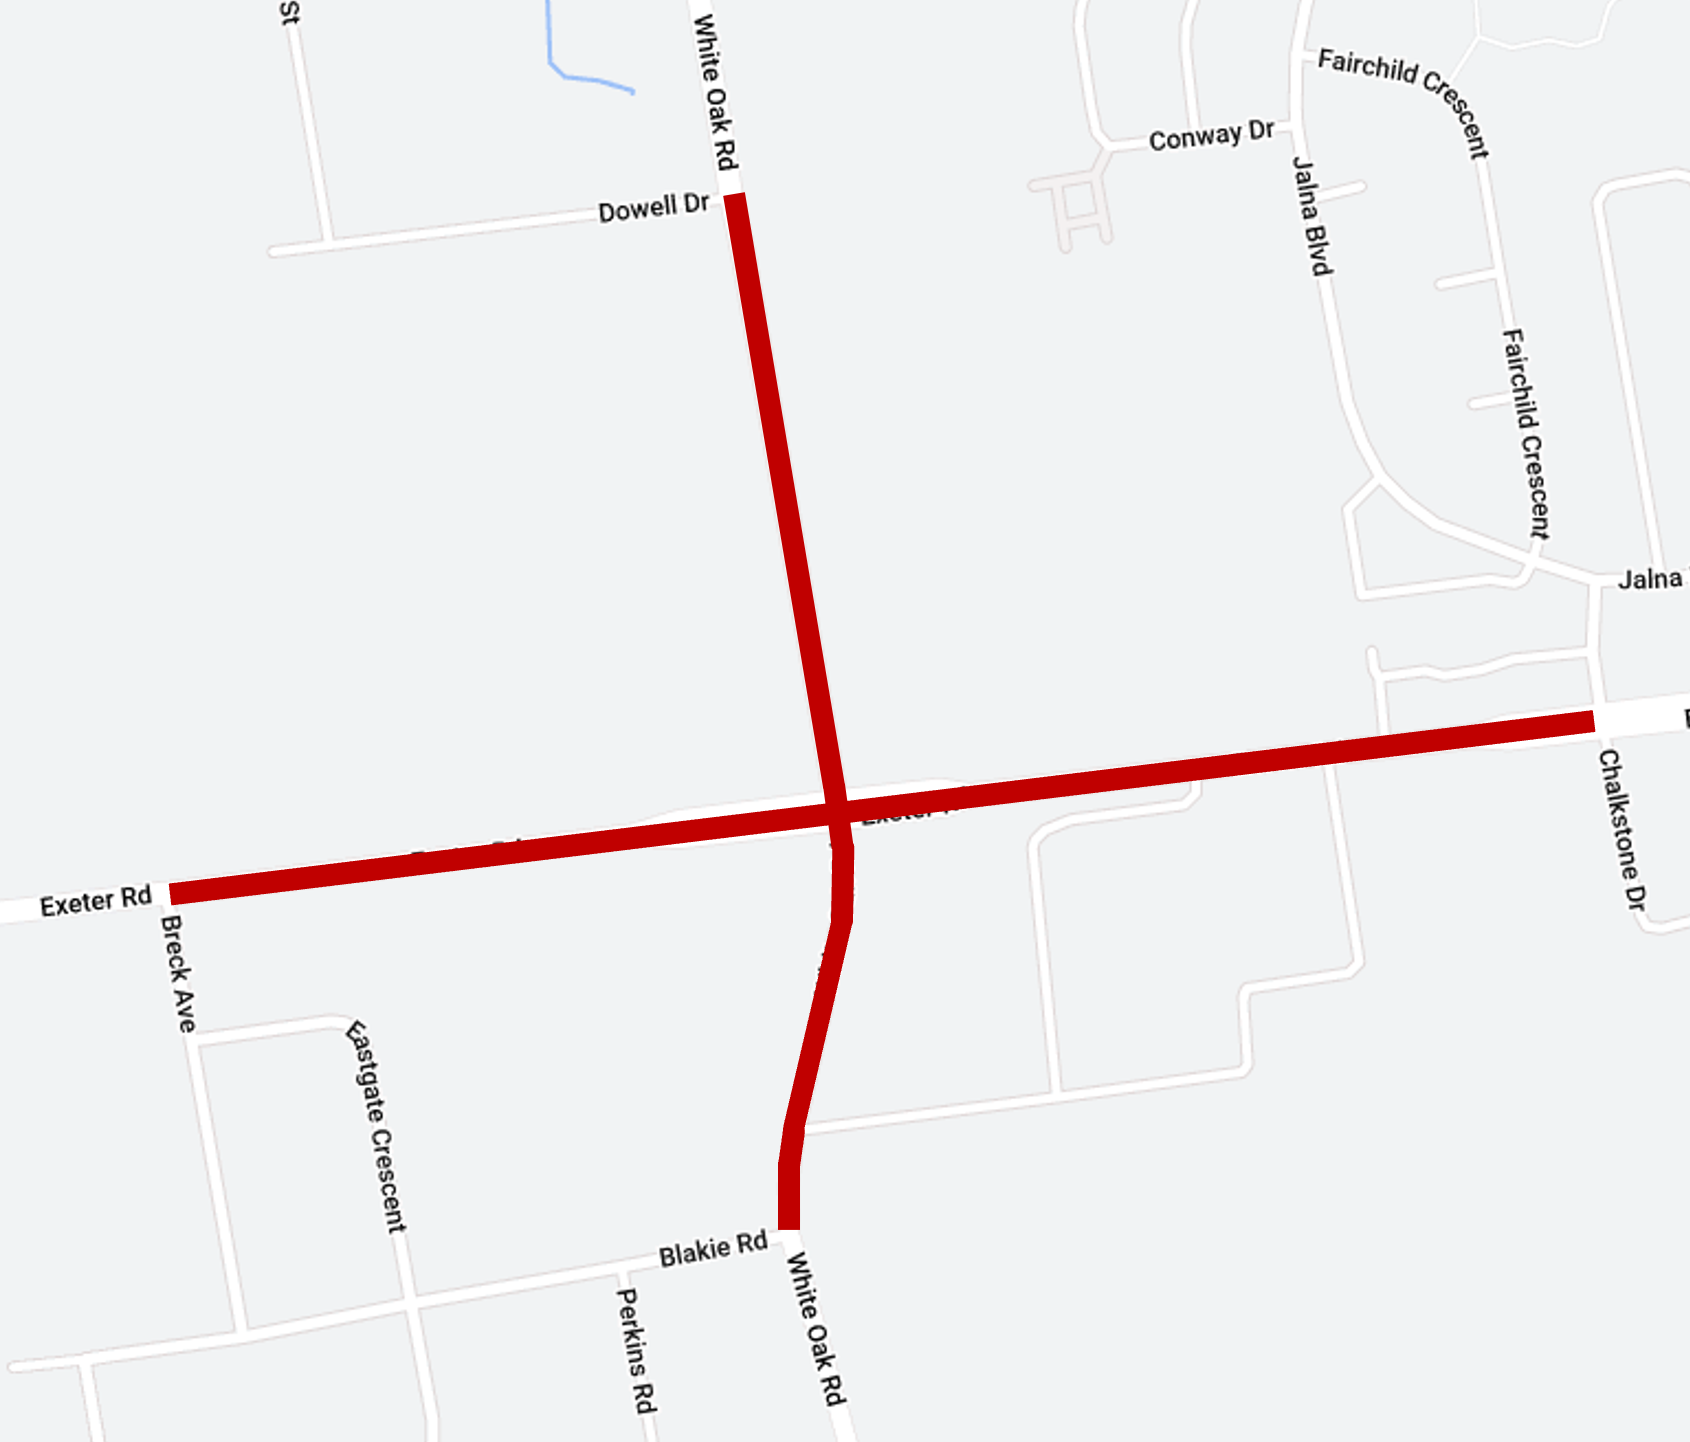 Exeter and White Oak Rd intersection closure 